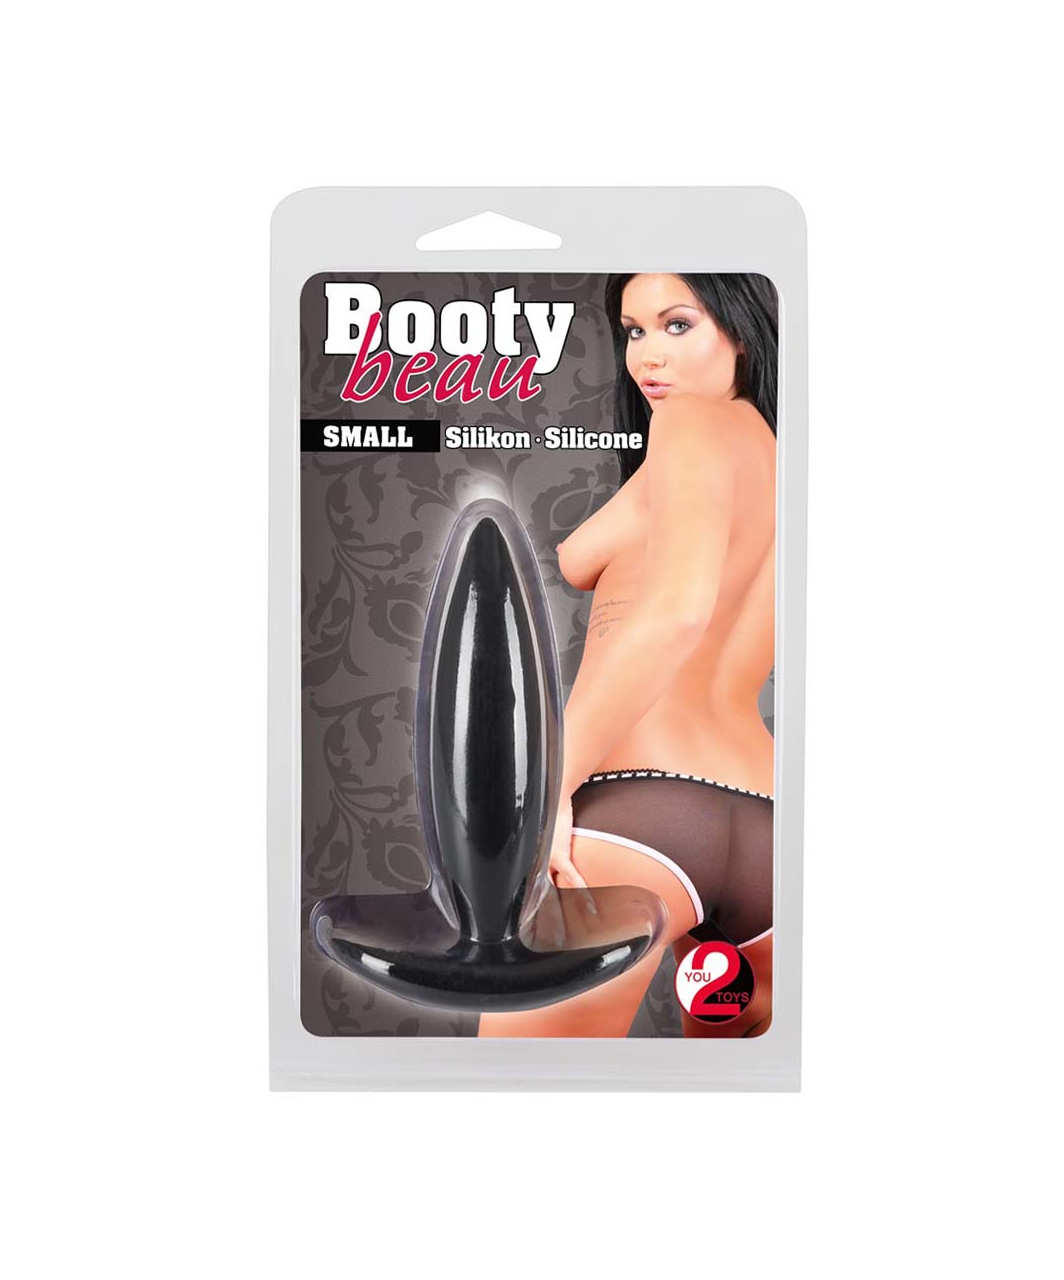 You2Toys Booty Beau Small